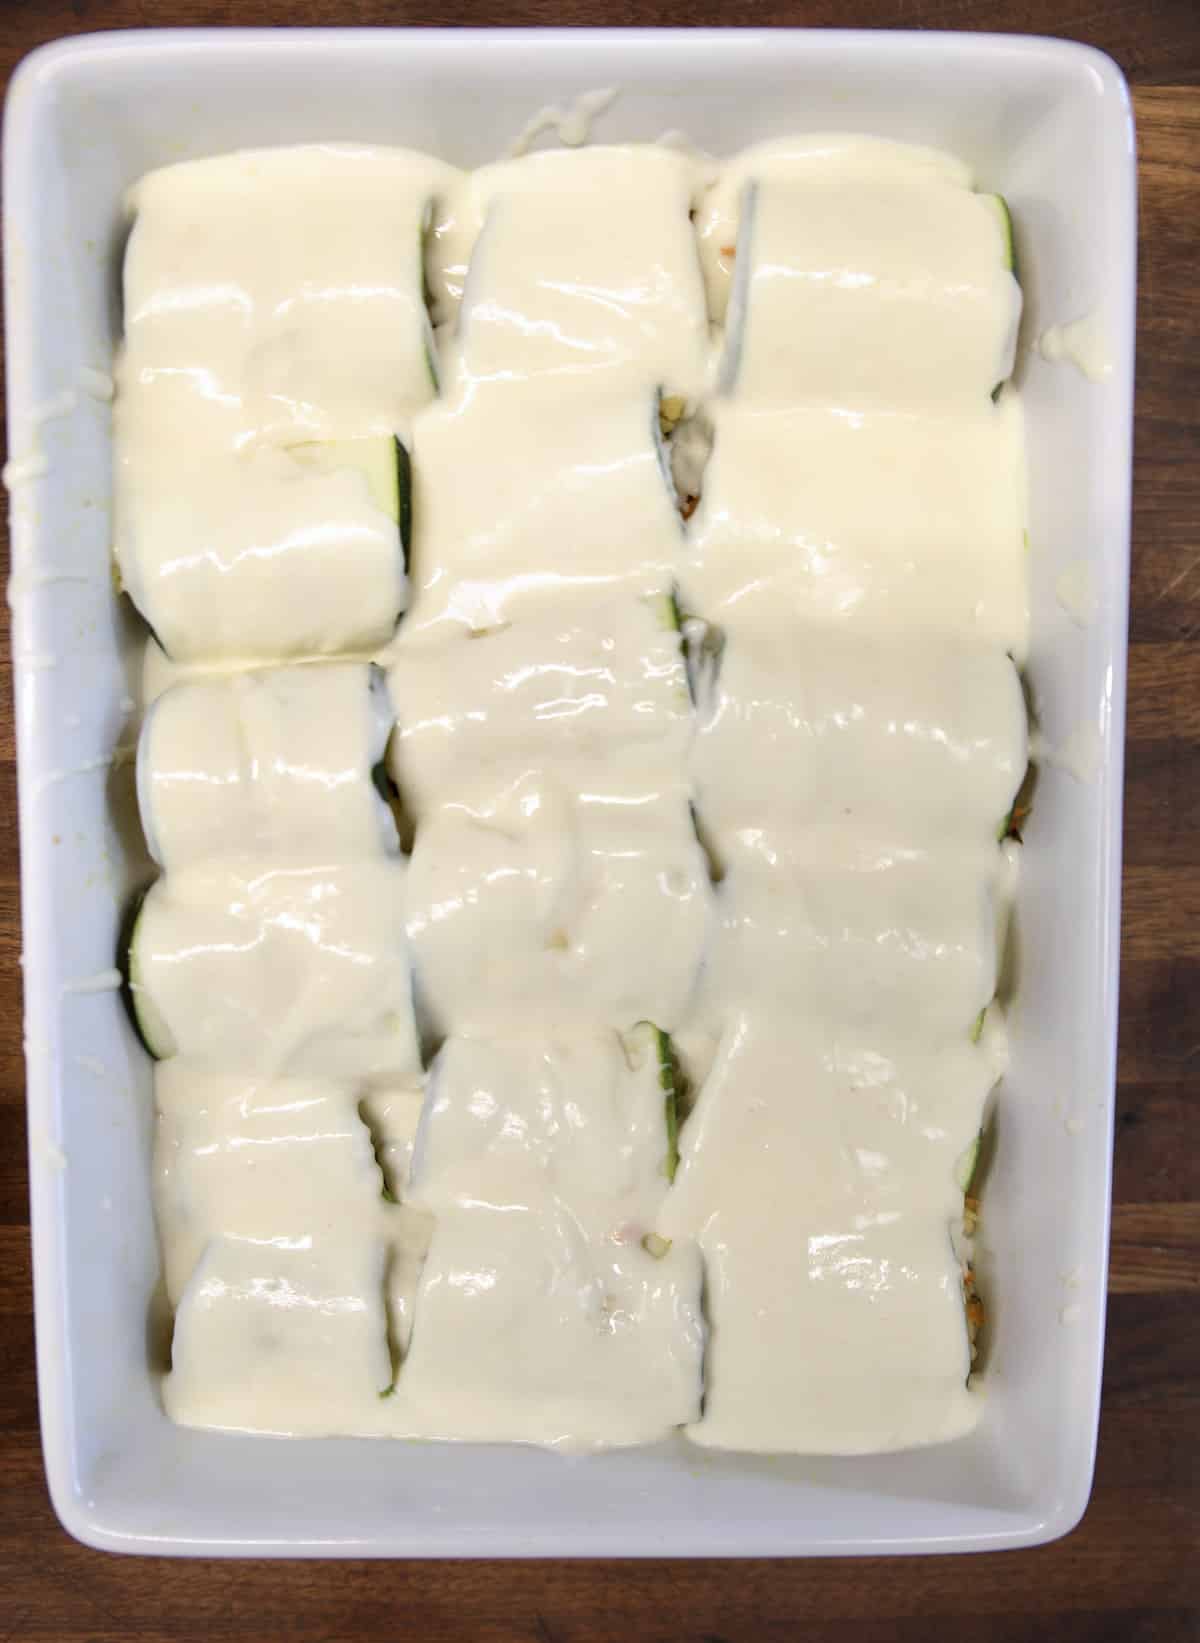 Zucchini casserole with cream sauce poured over the top.